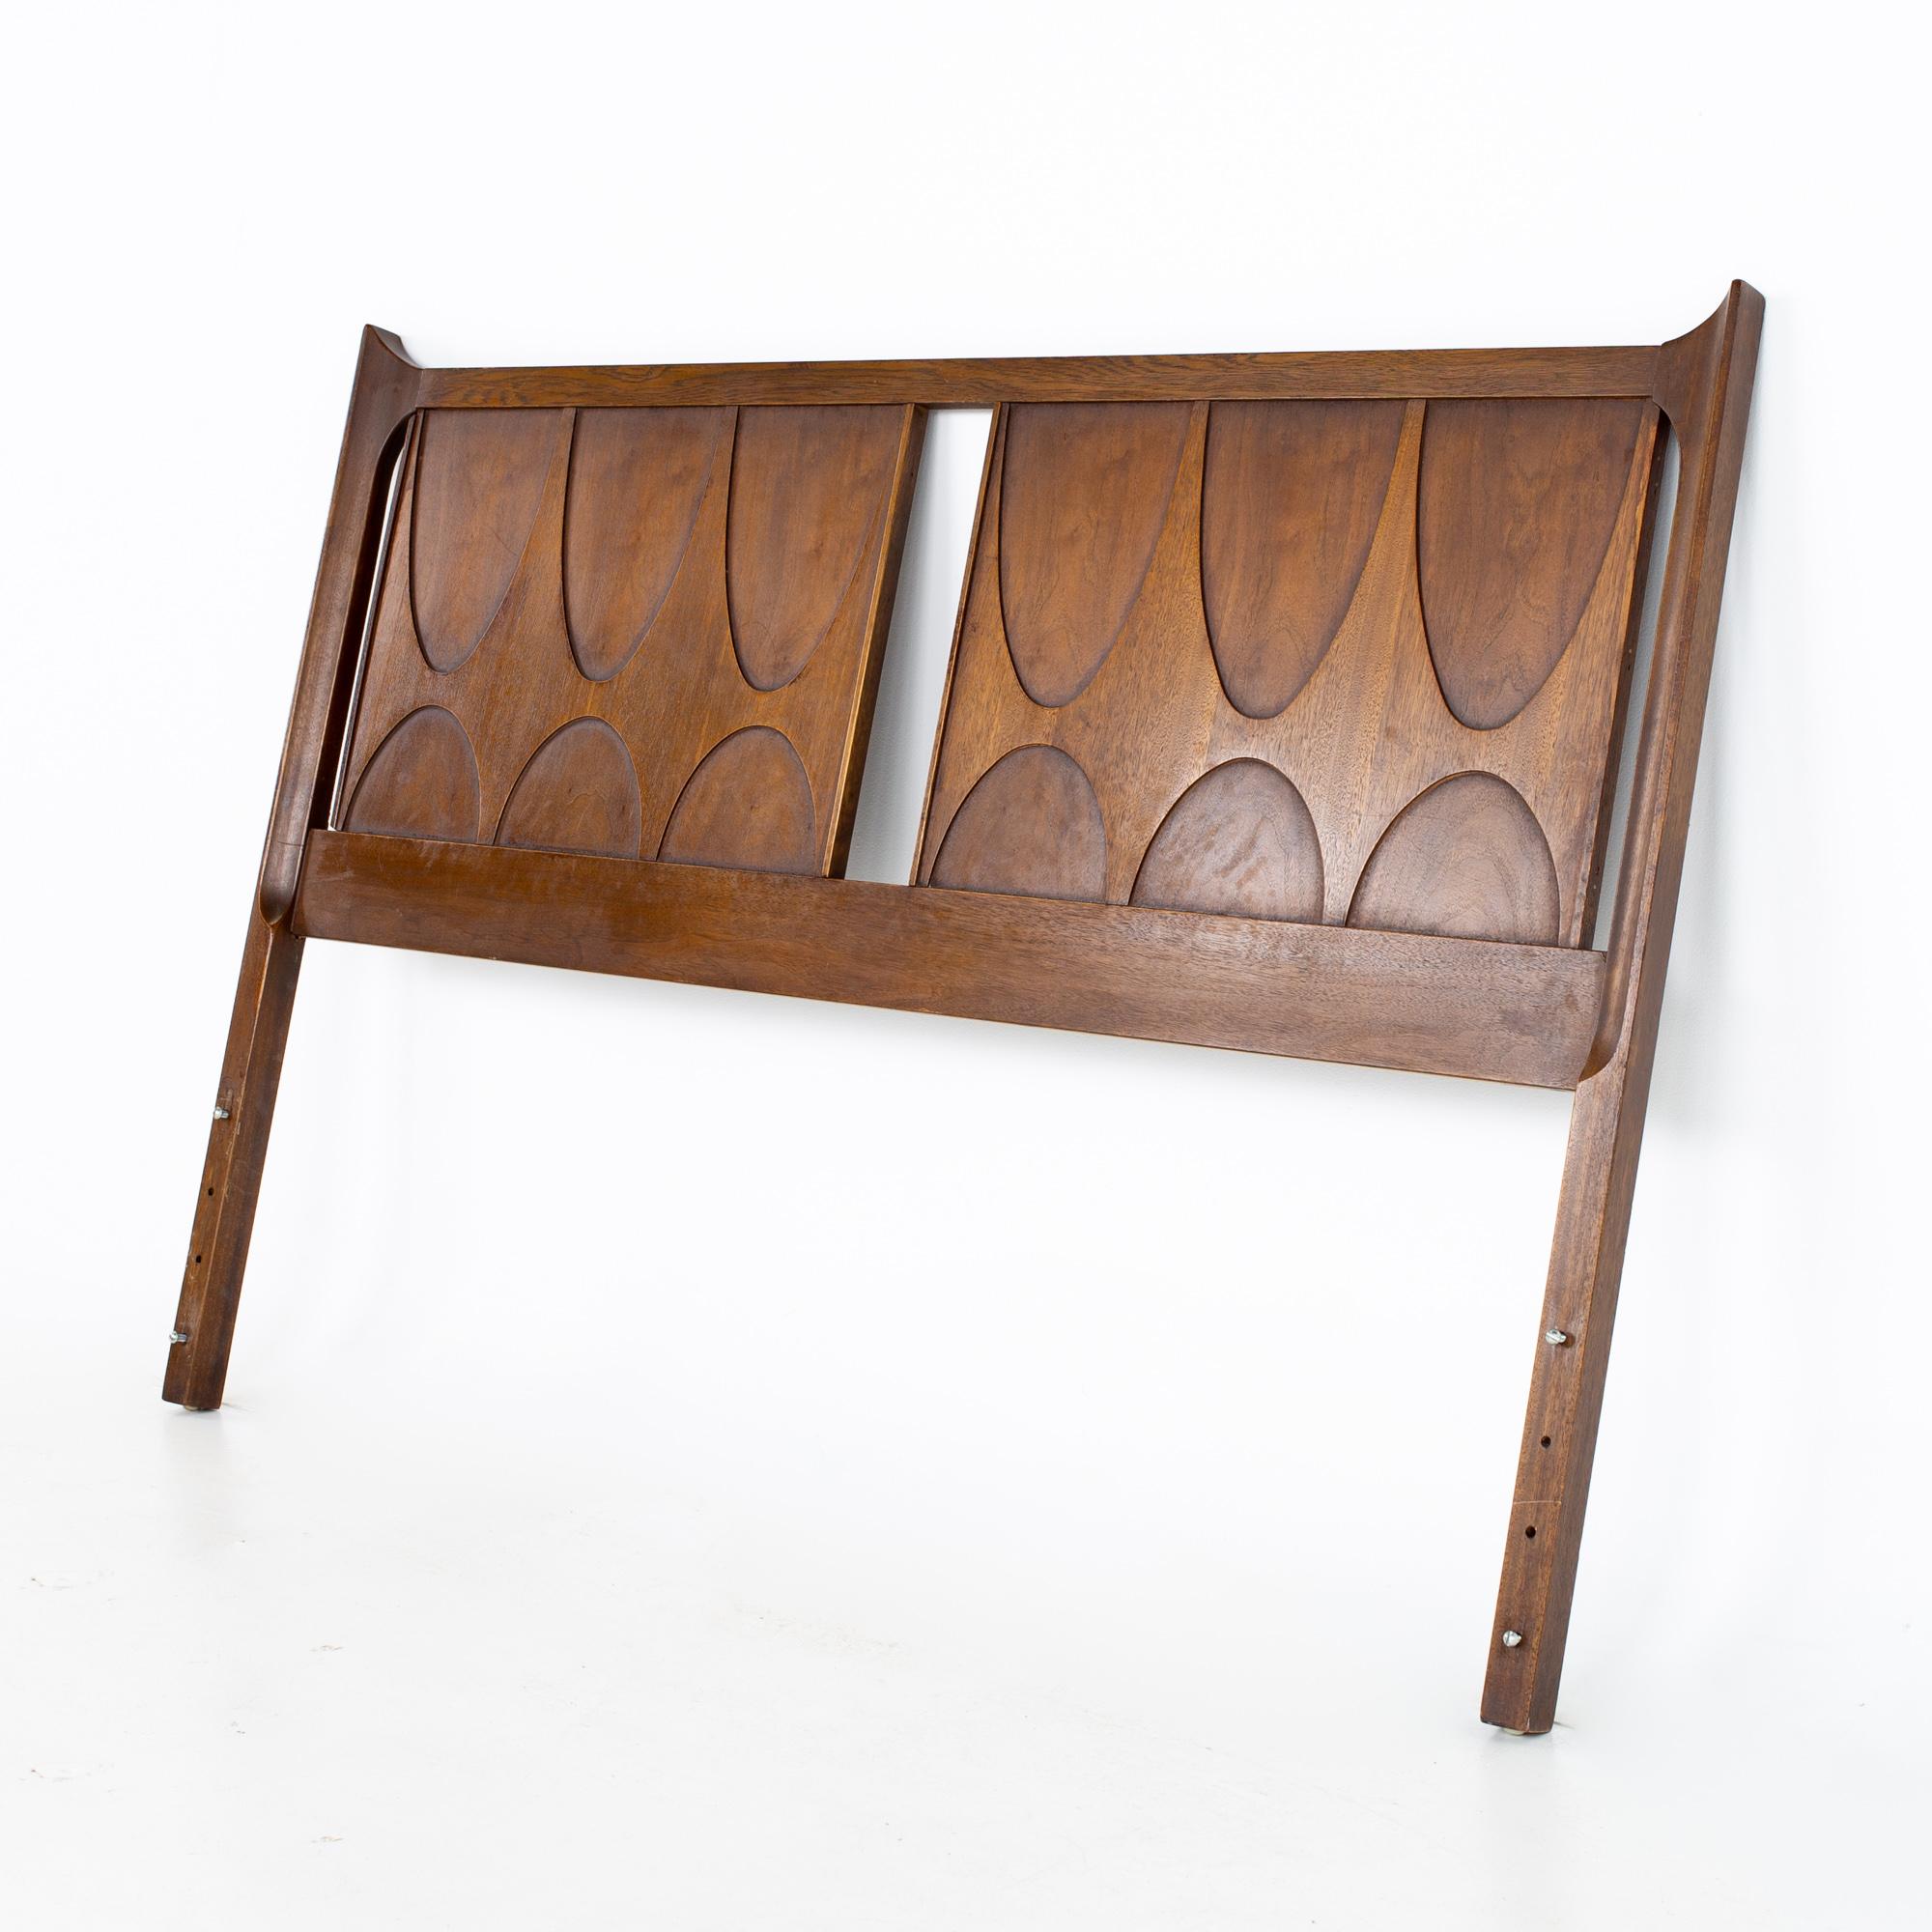 Broyhill Brasilia mid century walnut full headboard
Headboard measures: 57.5 wide x 1.75 deep x 41 inches high

All pieces of furniture can be had in what we call restored vintage condition. That means the piece is restored upon purchase so it’s